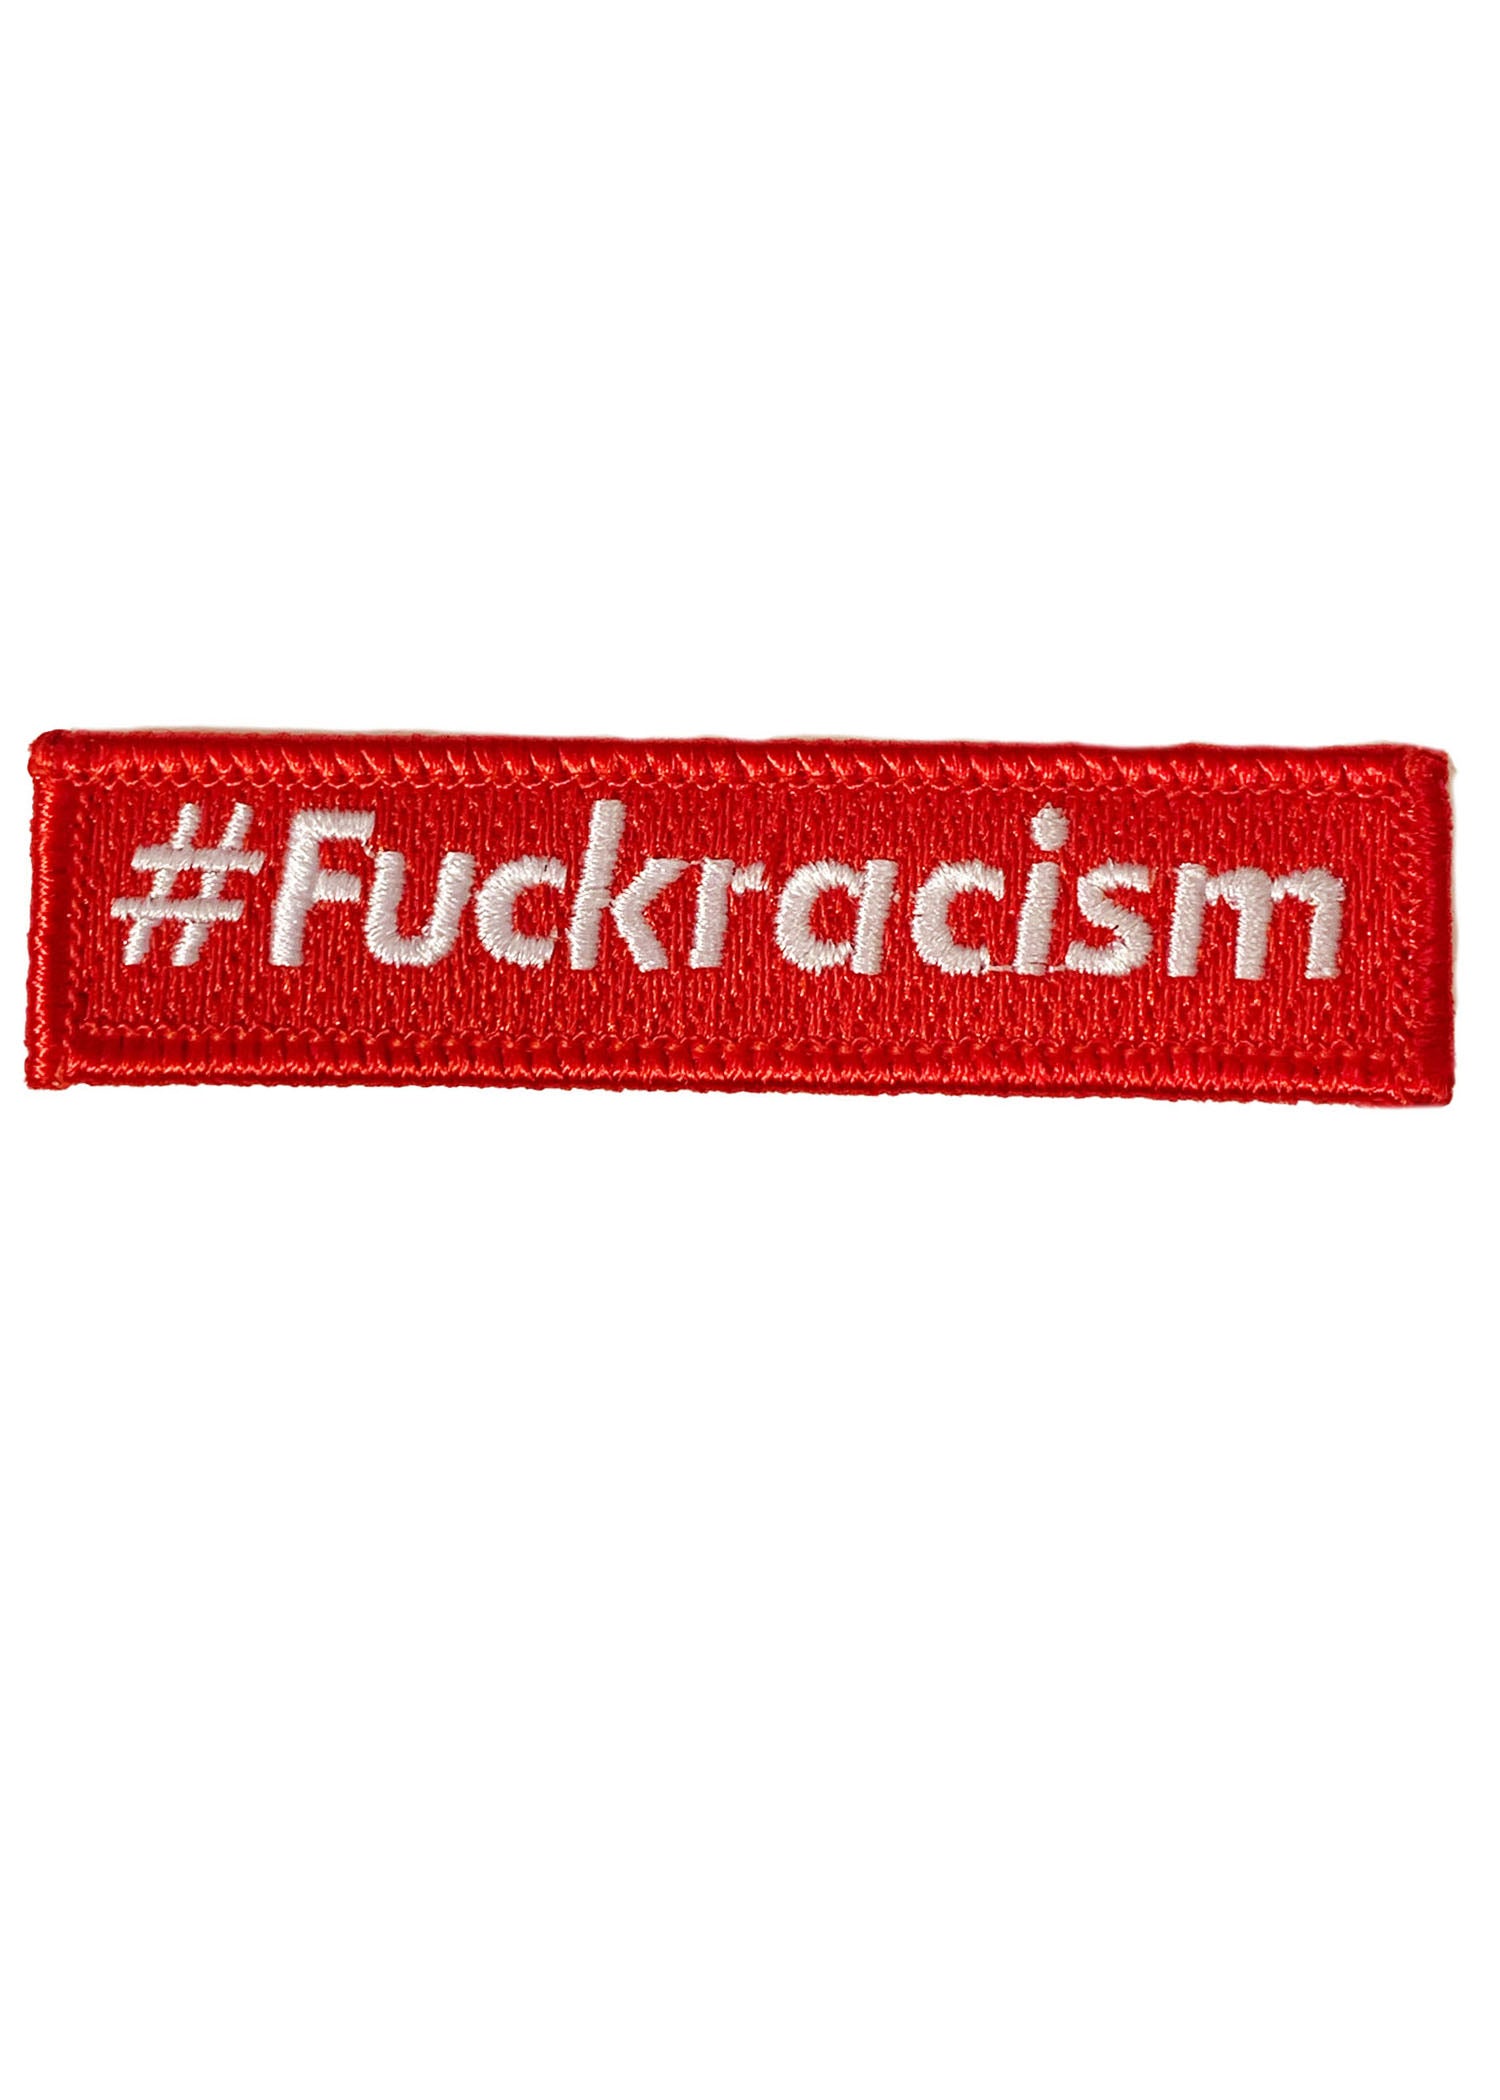 Fuck Racism Bar Iron On Patch